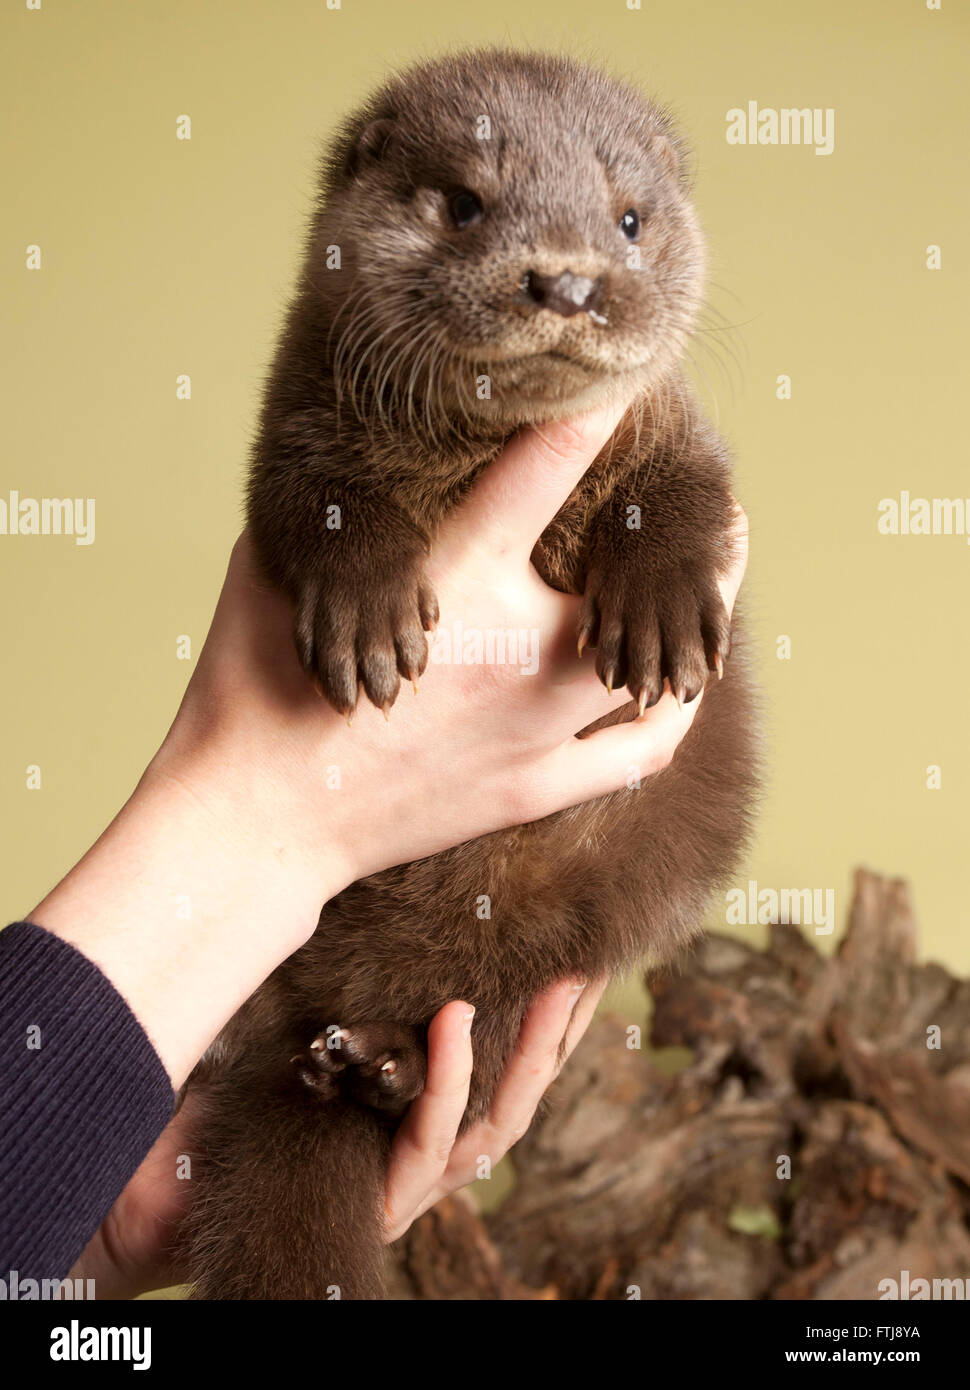 jeune loutre  Baby animals, Otters, Black and white kittens